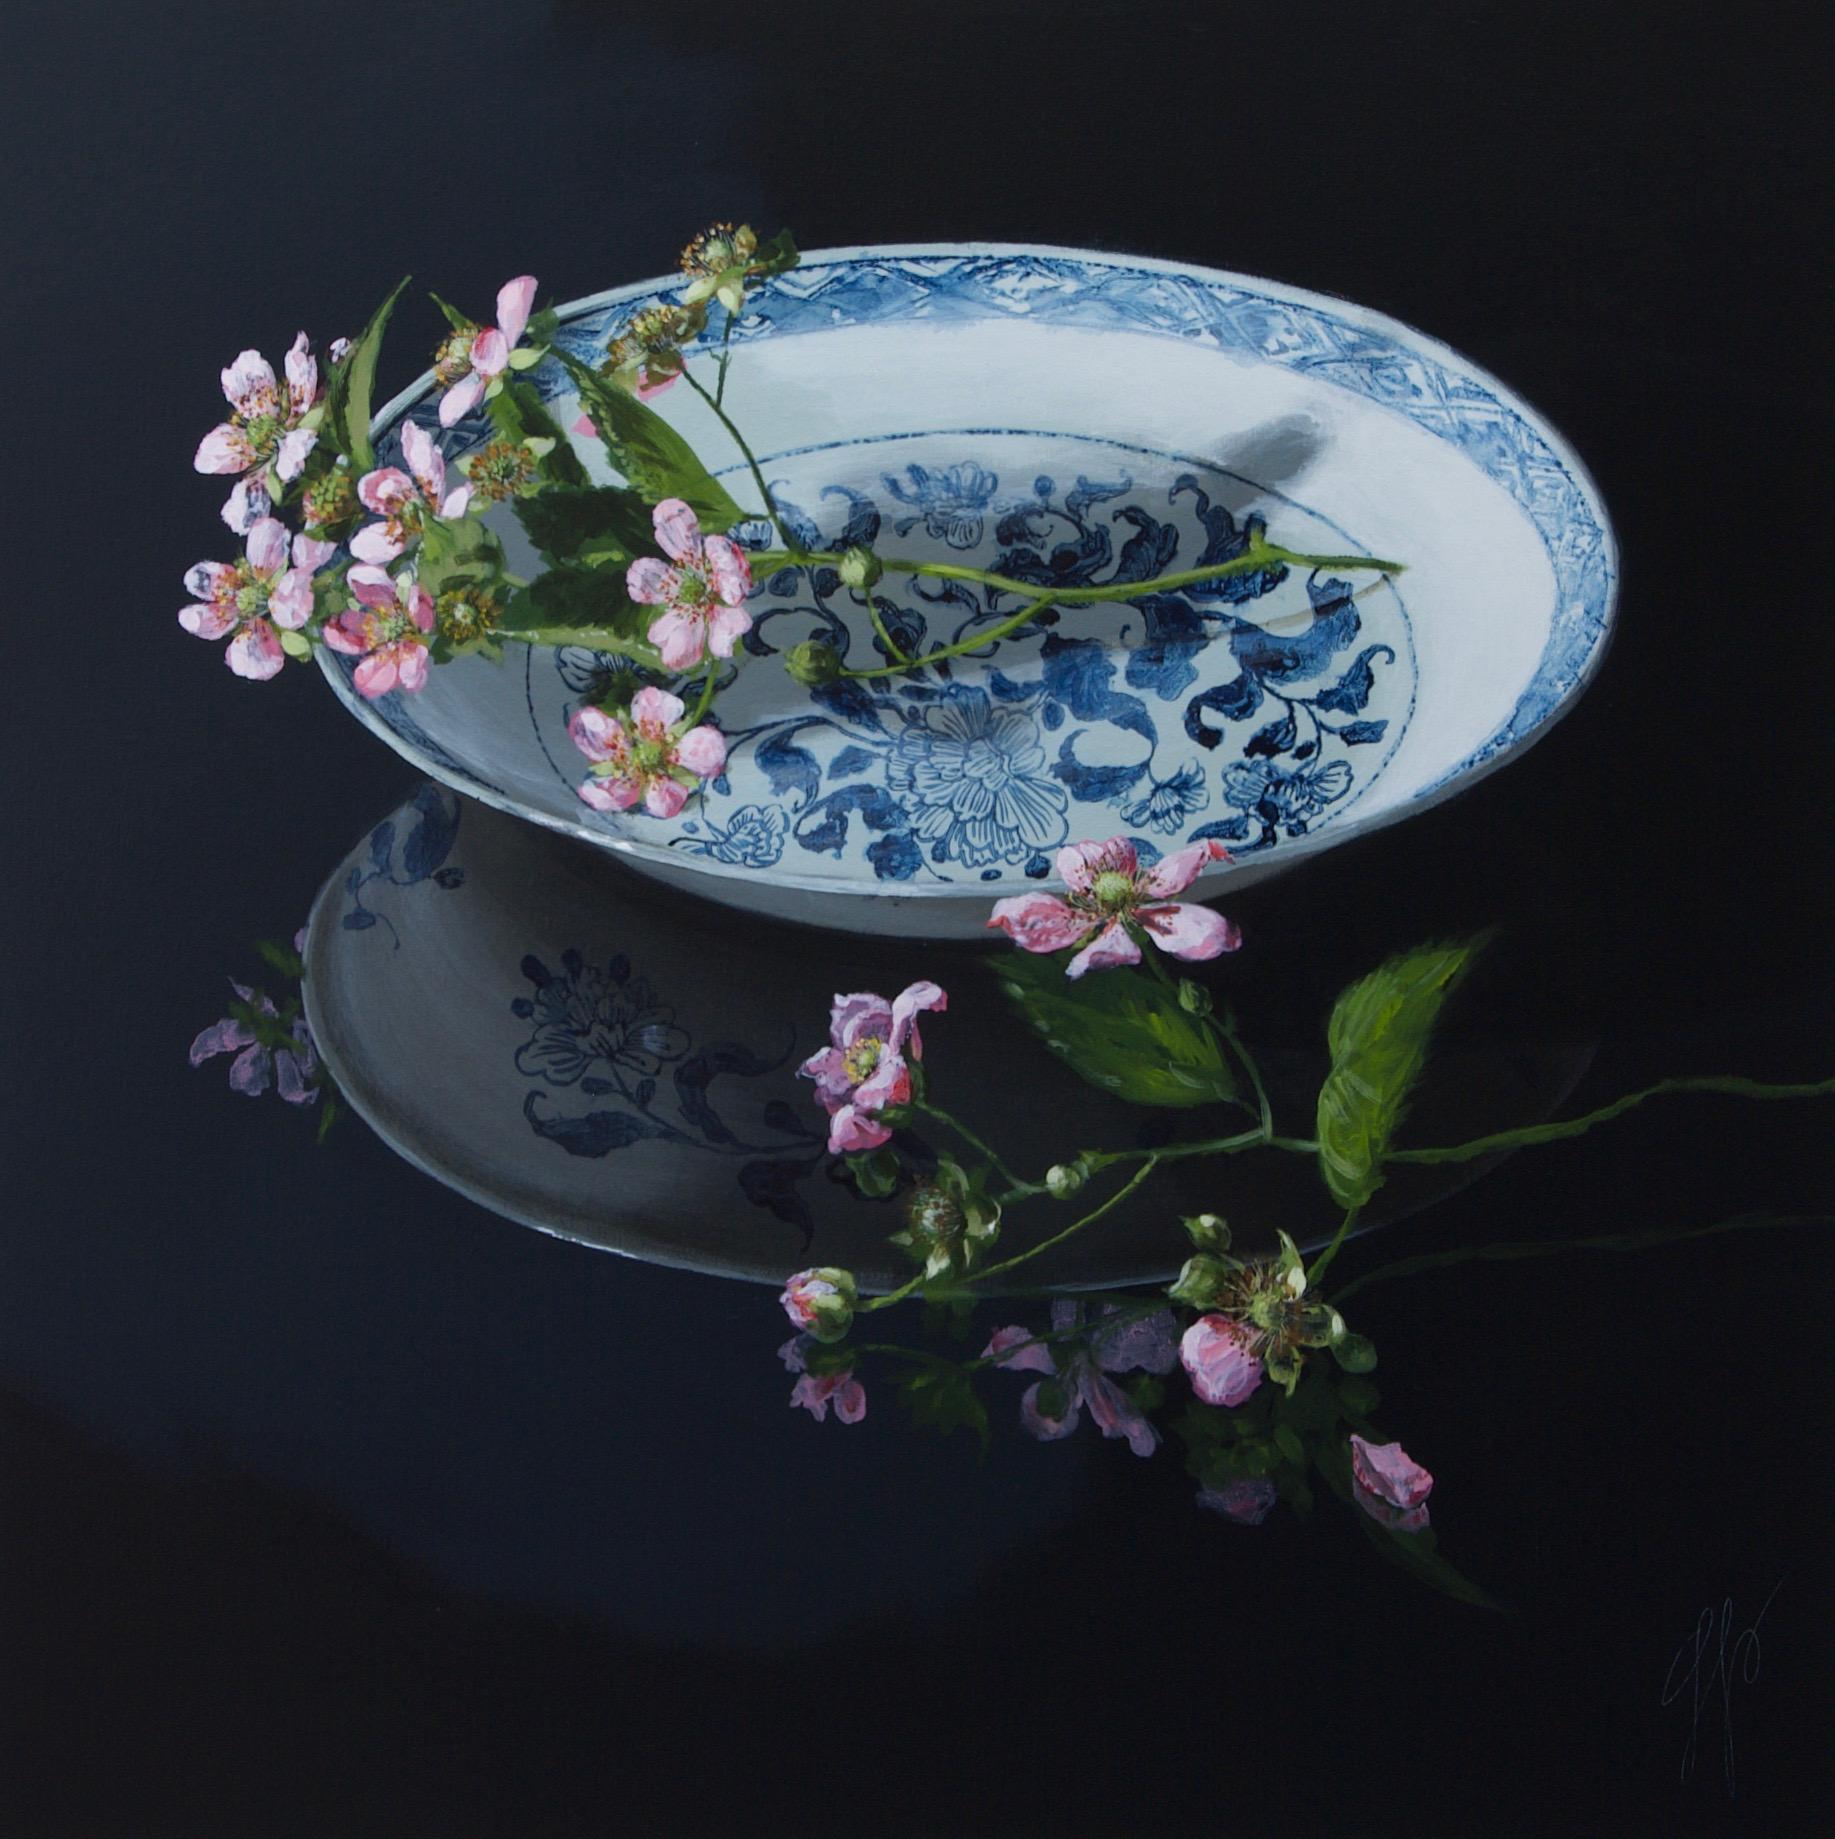 Sasja Wagenaar Figurative Painting - ''Chinese Plate with Blackberryblossom'' Contemporary Still Life Porcelain